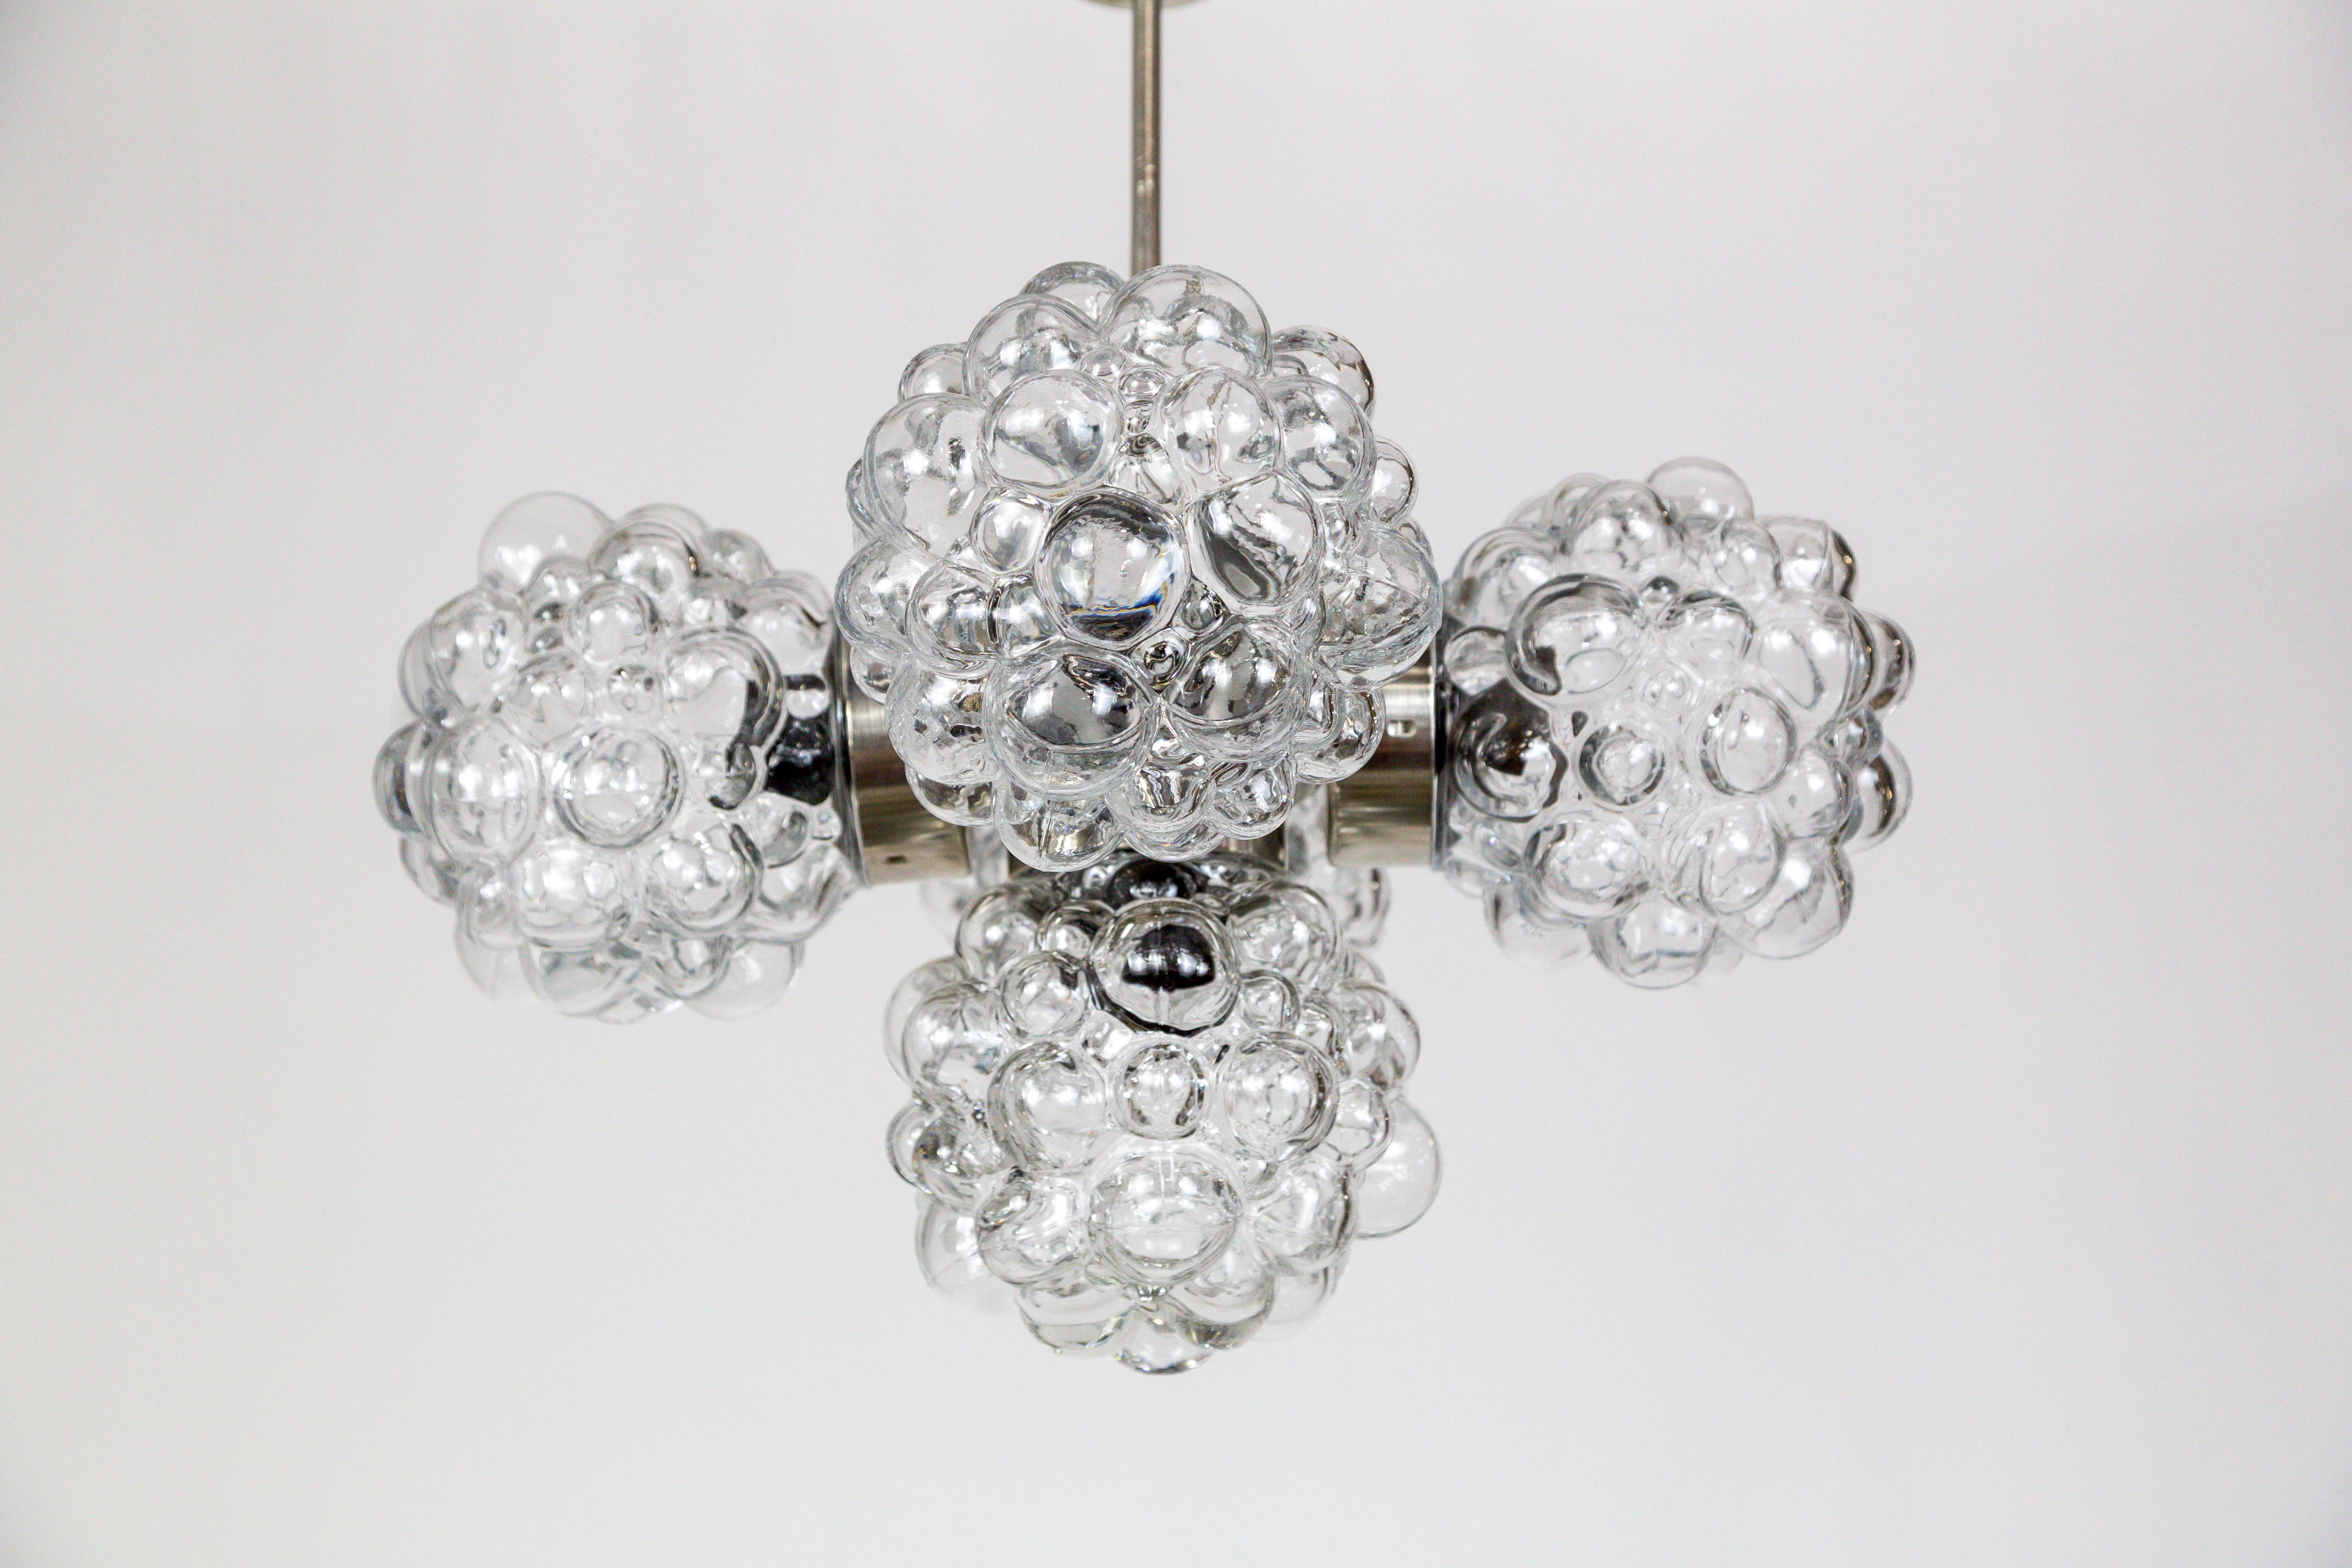 A gorgeous pendant light with five, molded glass bubble spheres, designed by Helena Tynell, and fabricated in the early 1970s in Germany by Limburg. The metal structure has a slick, chrome finish. It looks great in smaller spaces, and has a strong